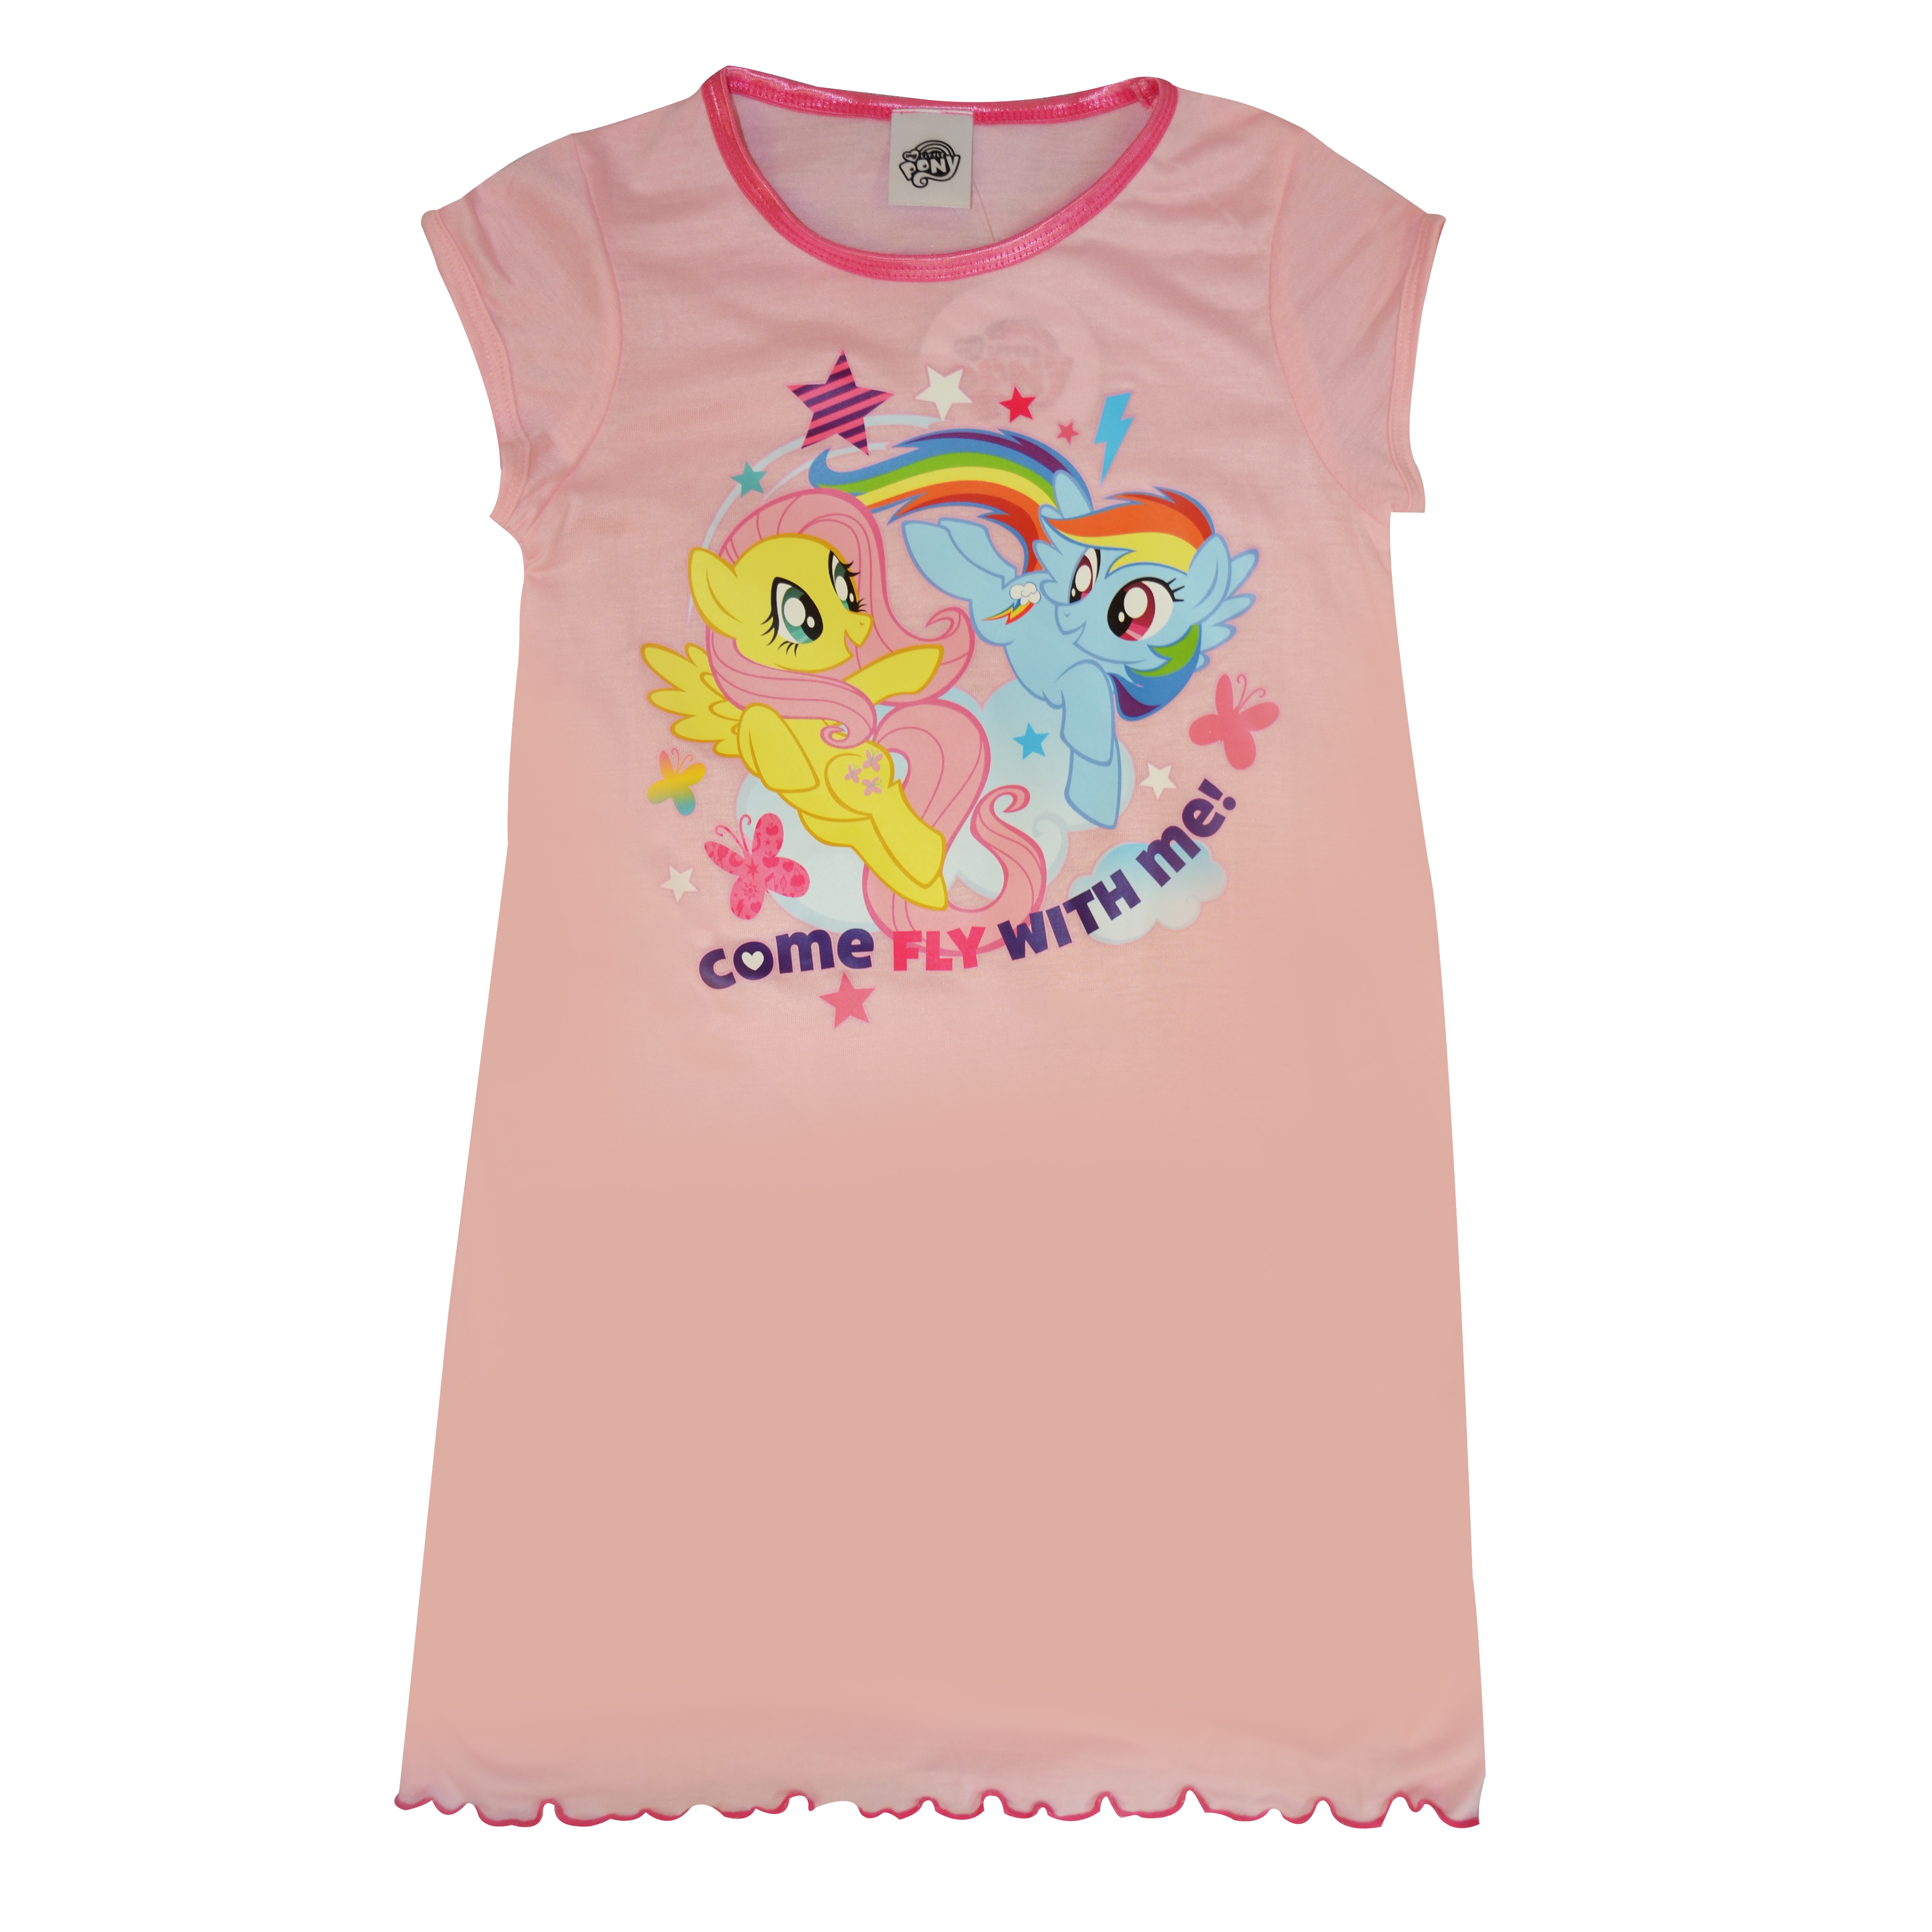 My Little Pony 'Come Fly with Me' 3-4 Years Nighty